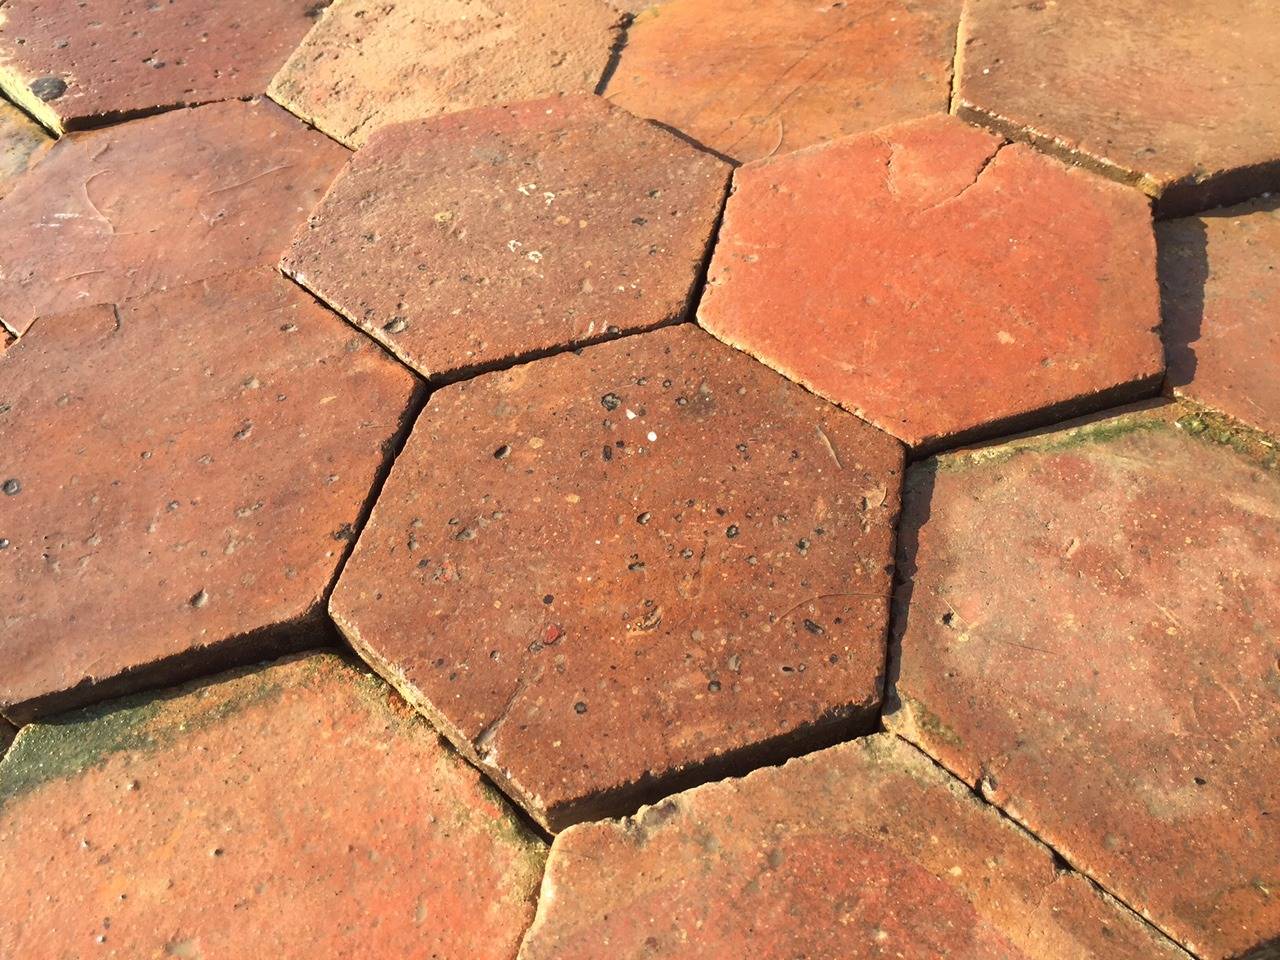 Rare and unique French antique hexagonal terracotta floors tiles (tomettes anciennes), handcrafted flooring in the 18th century from France.
Great quality and original patina from that period, beautiful design.
Rare and unique, excellent quality.